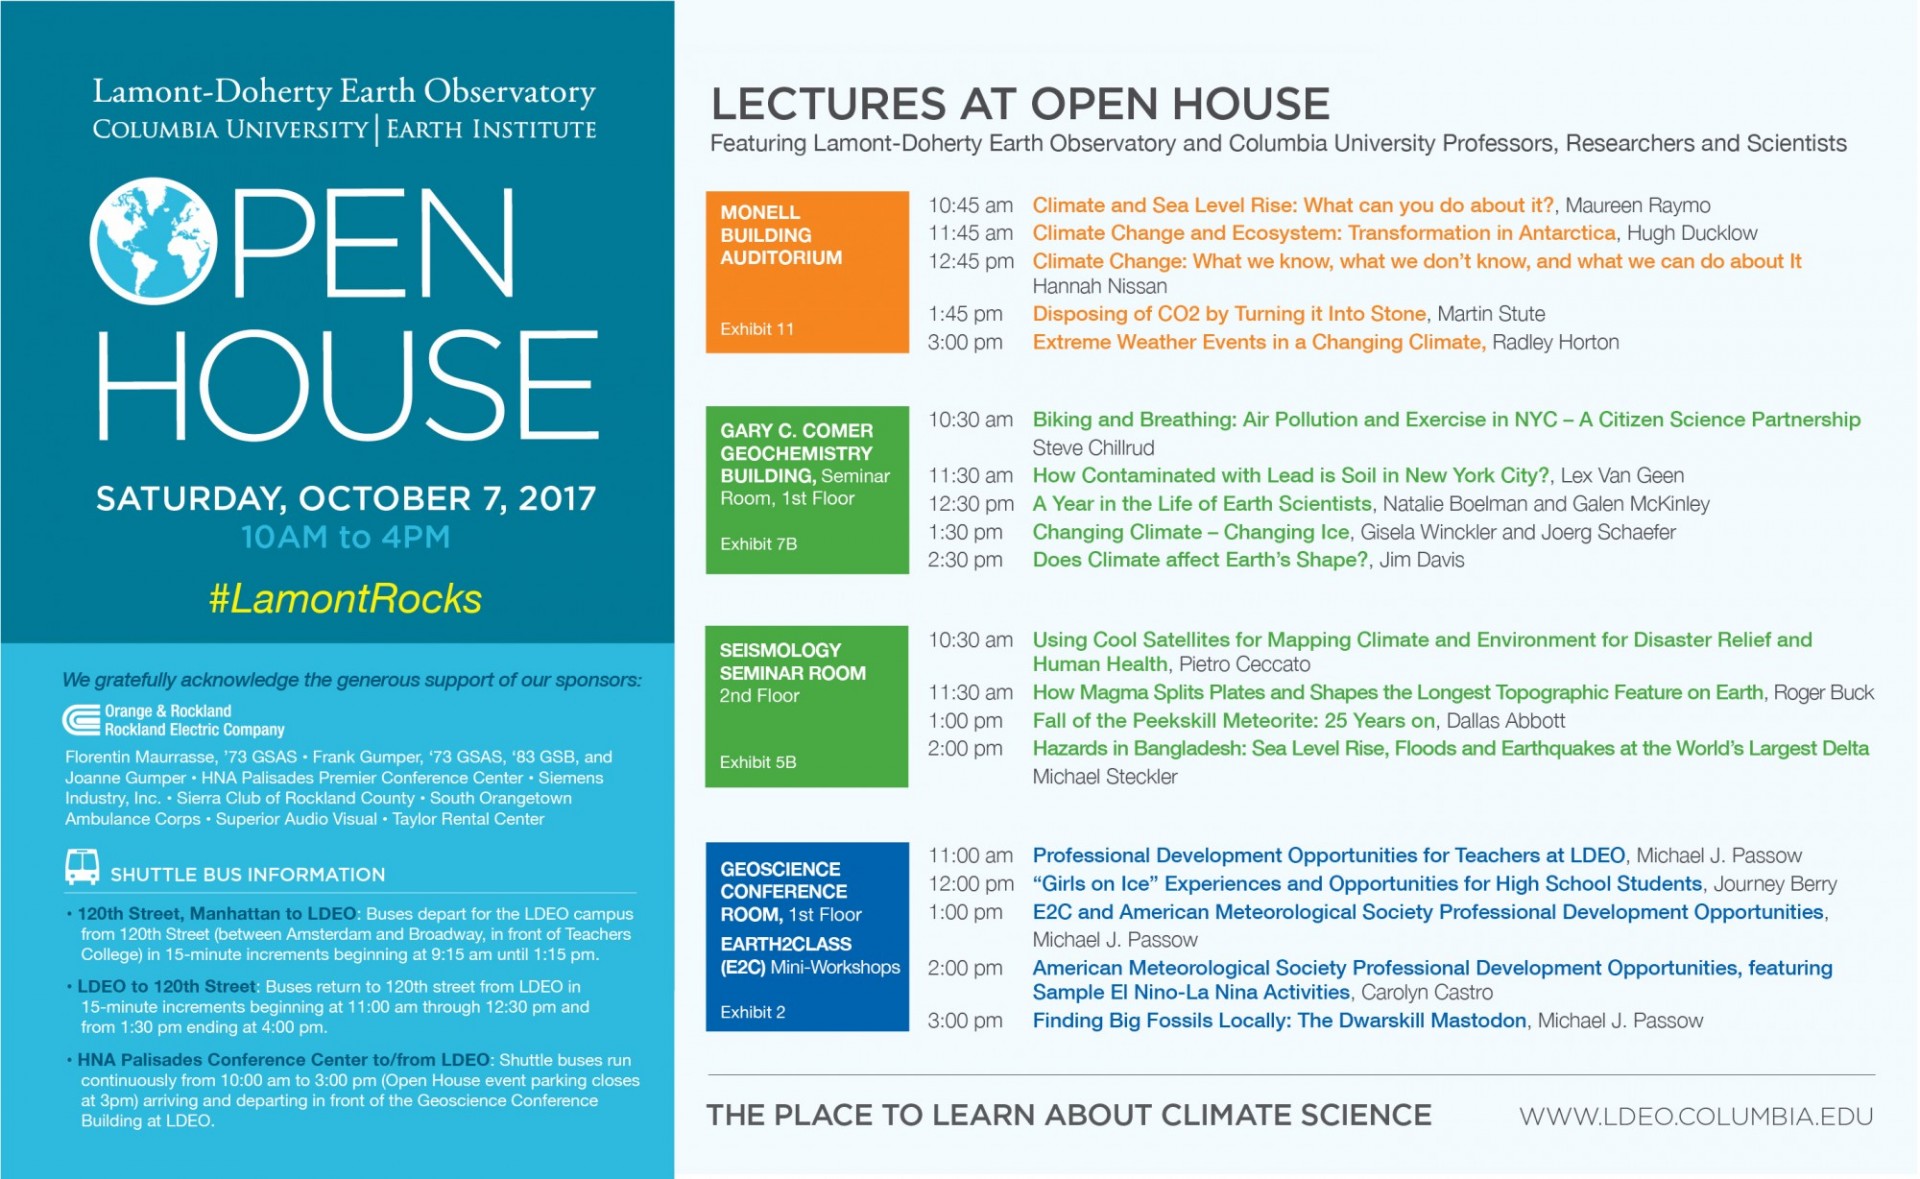 schedule and locations of lectures and workshops around campus